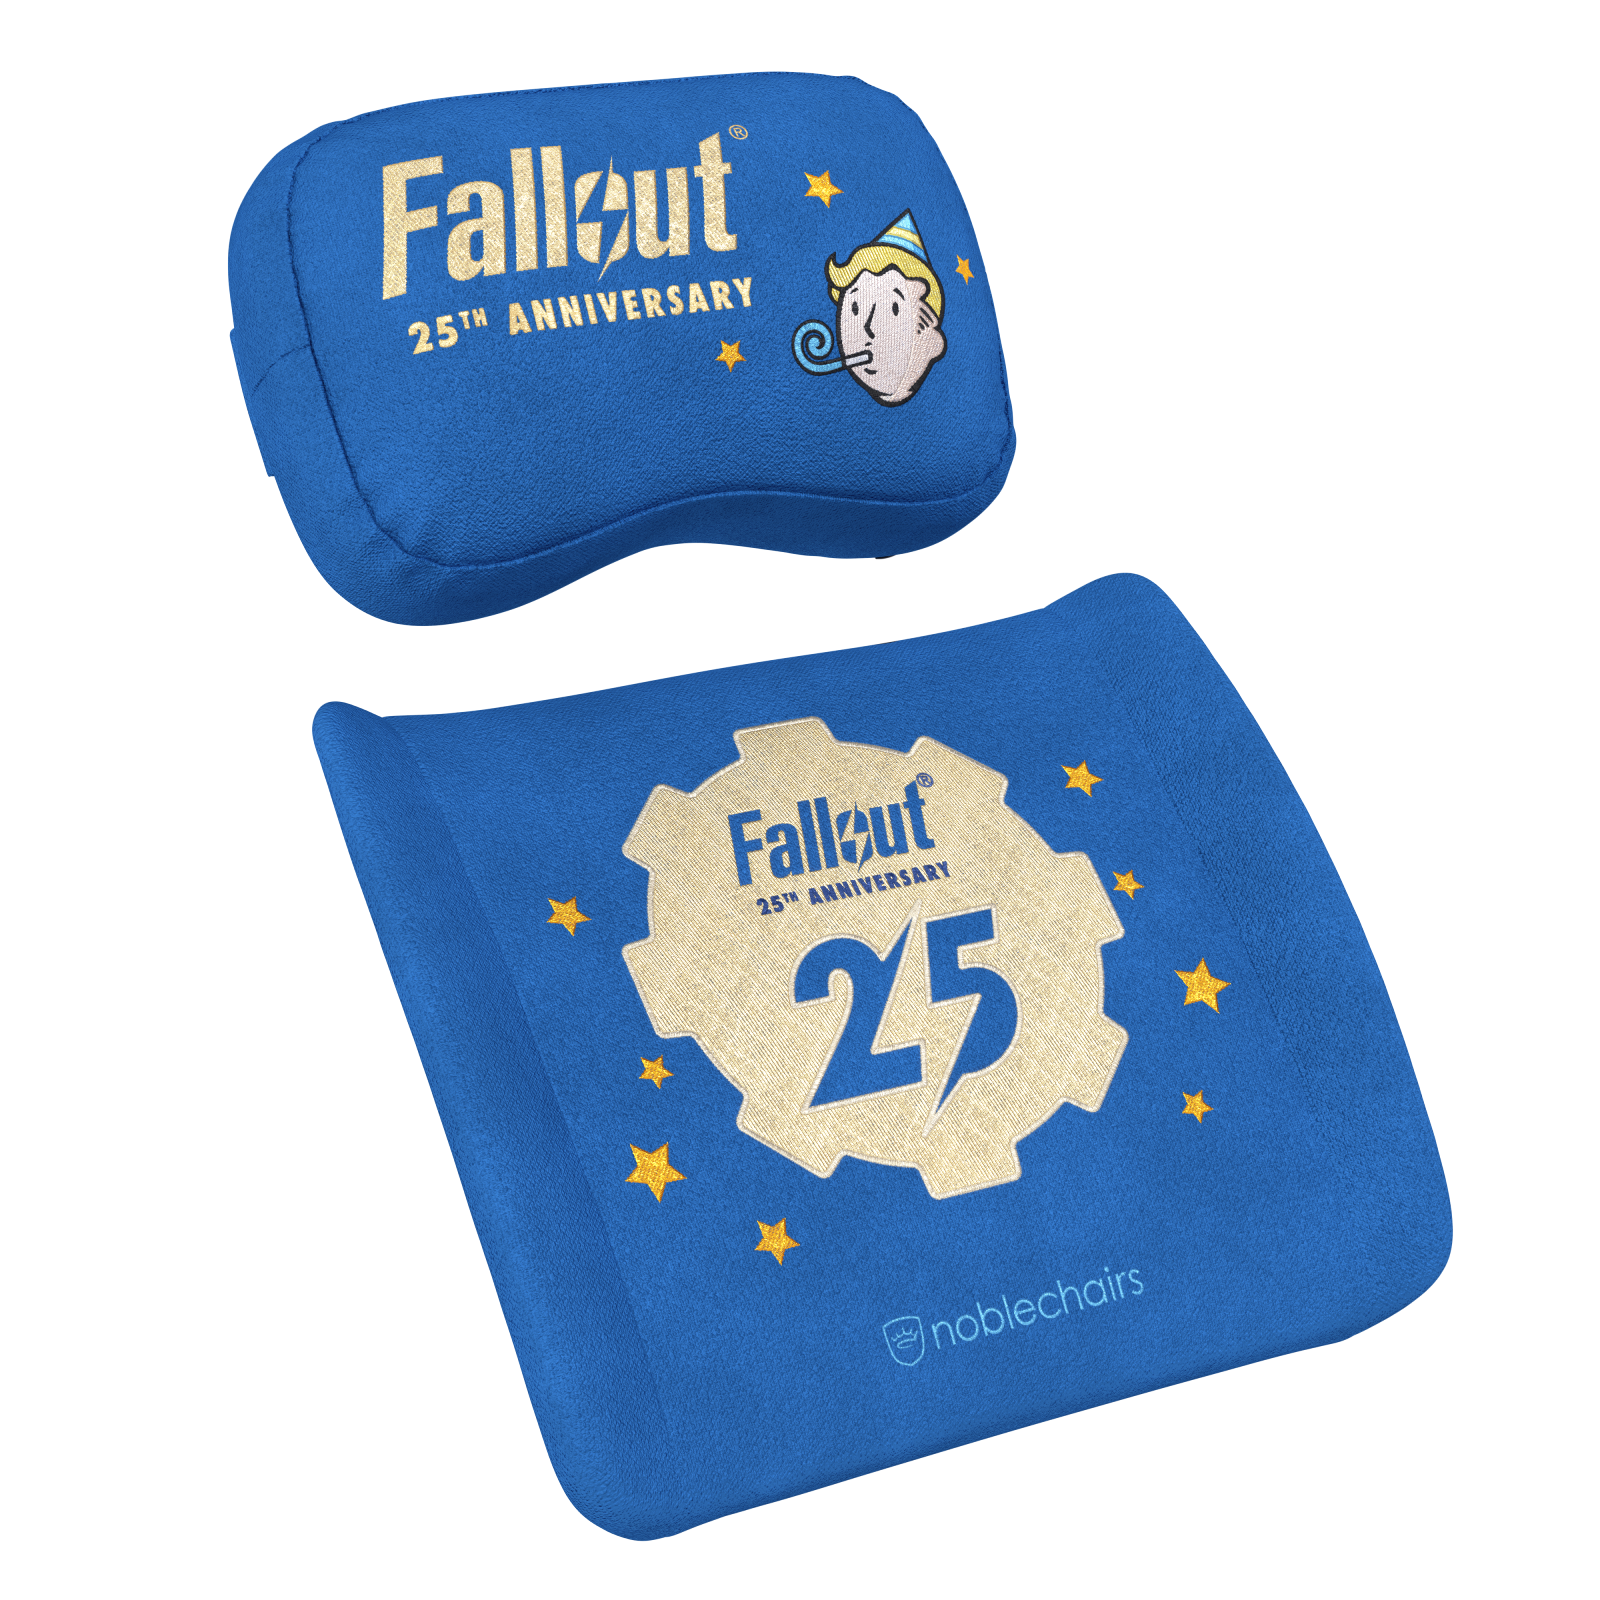 noblechairs Pillow Set Fallout 25th Anniversary Edition